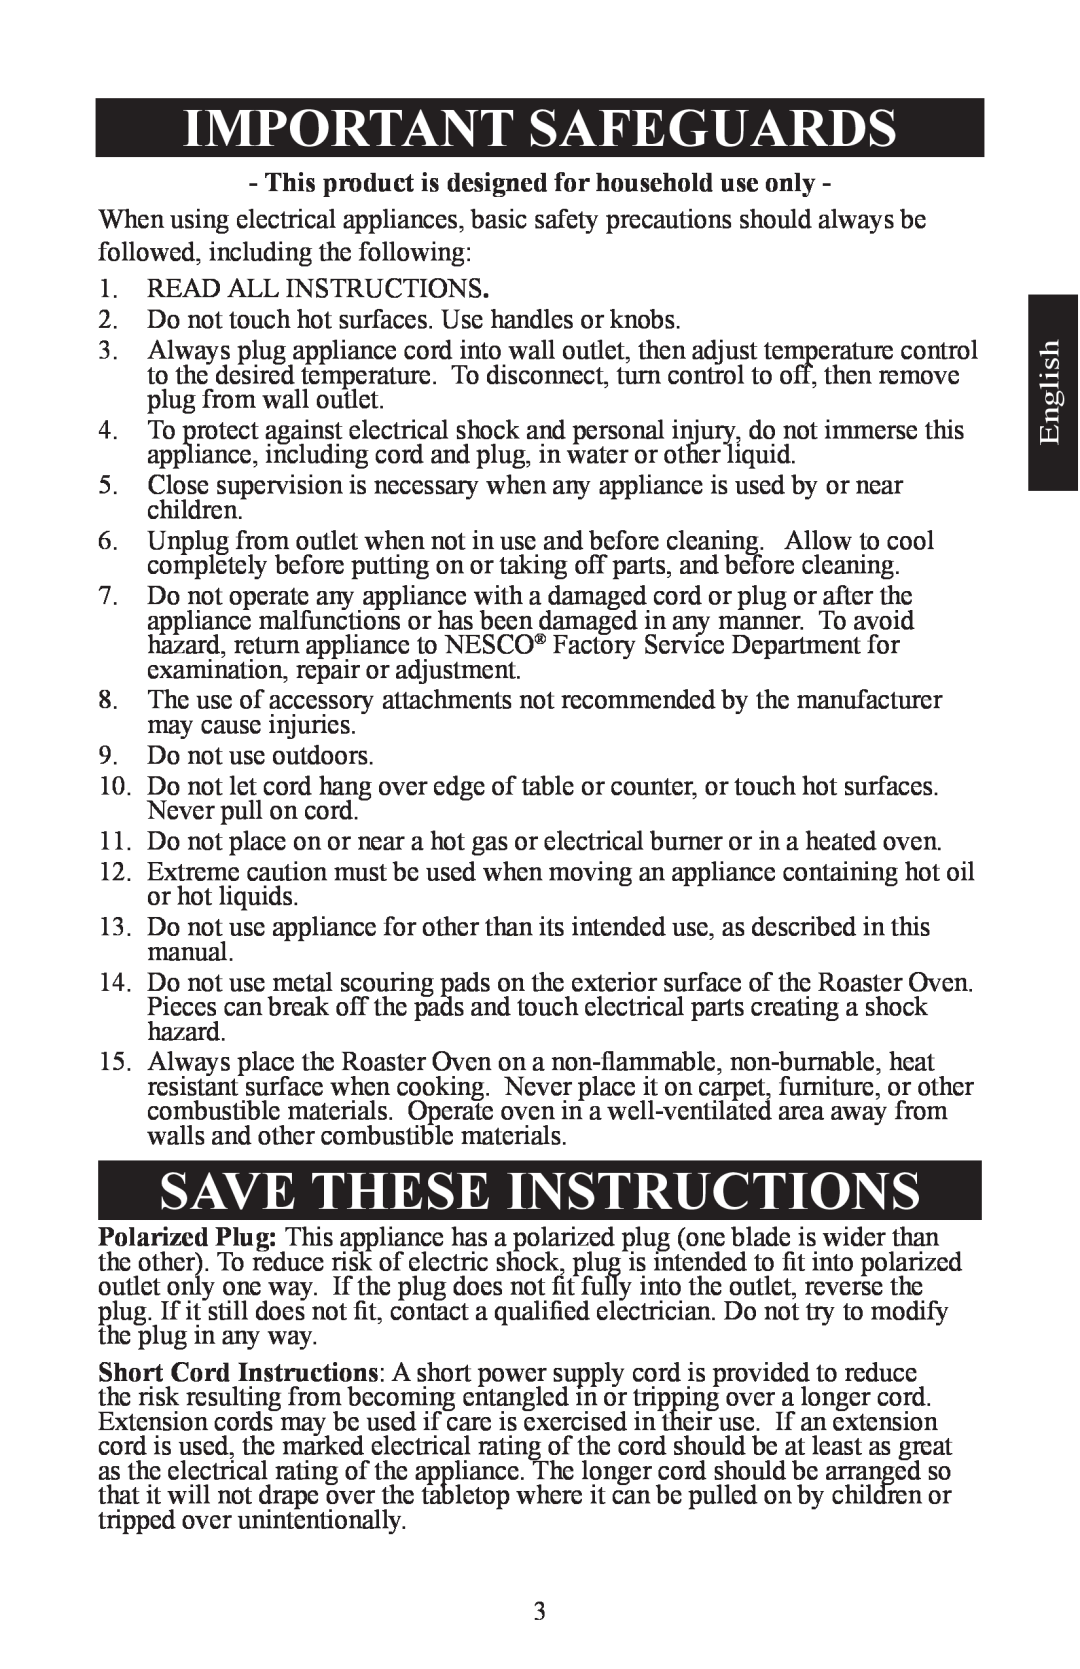 Nesco Electric Roaster Oven manual Important Safeguards, Save These Instructions, English 